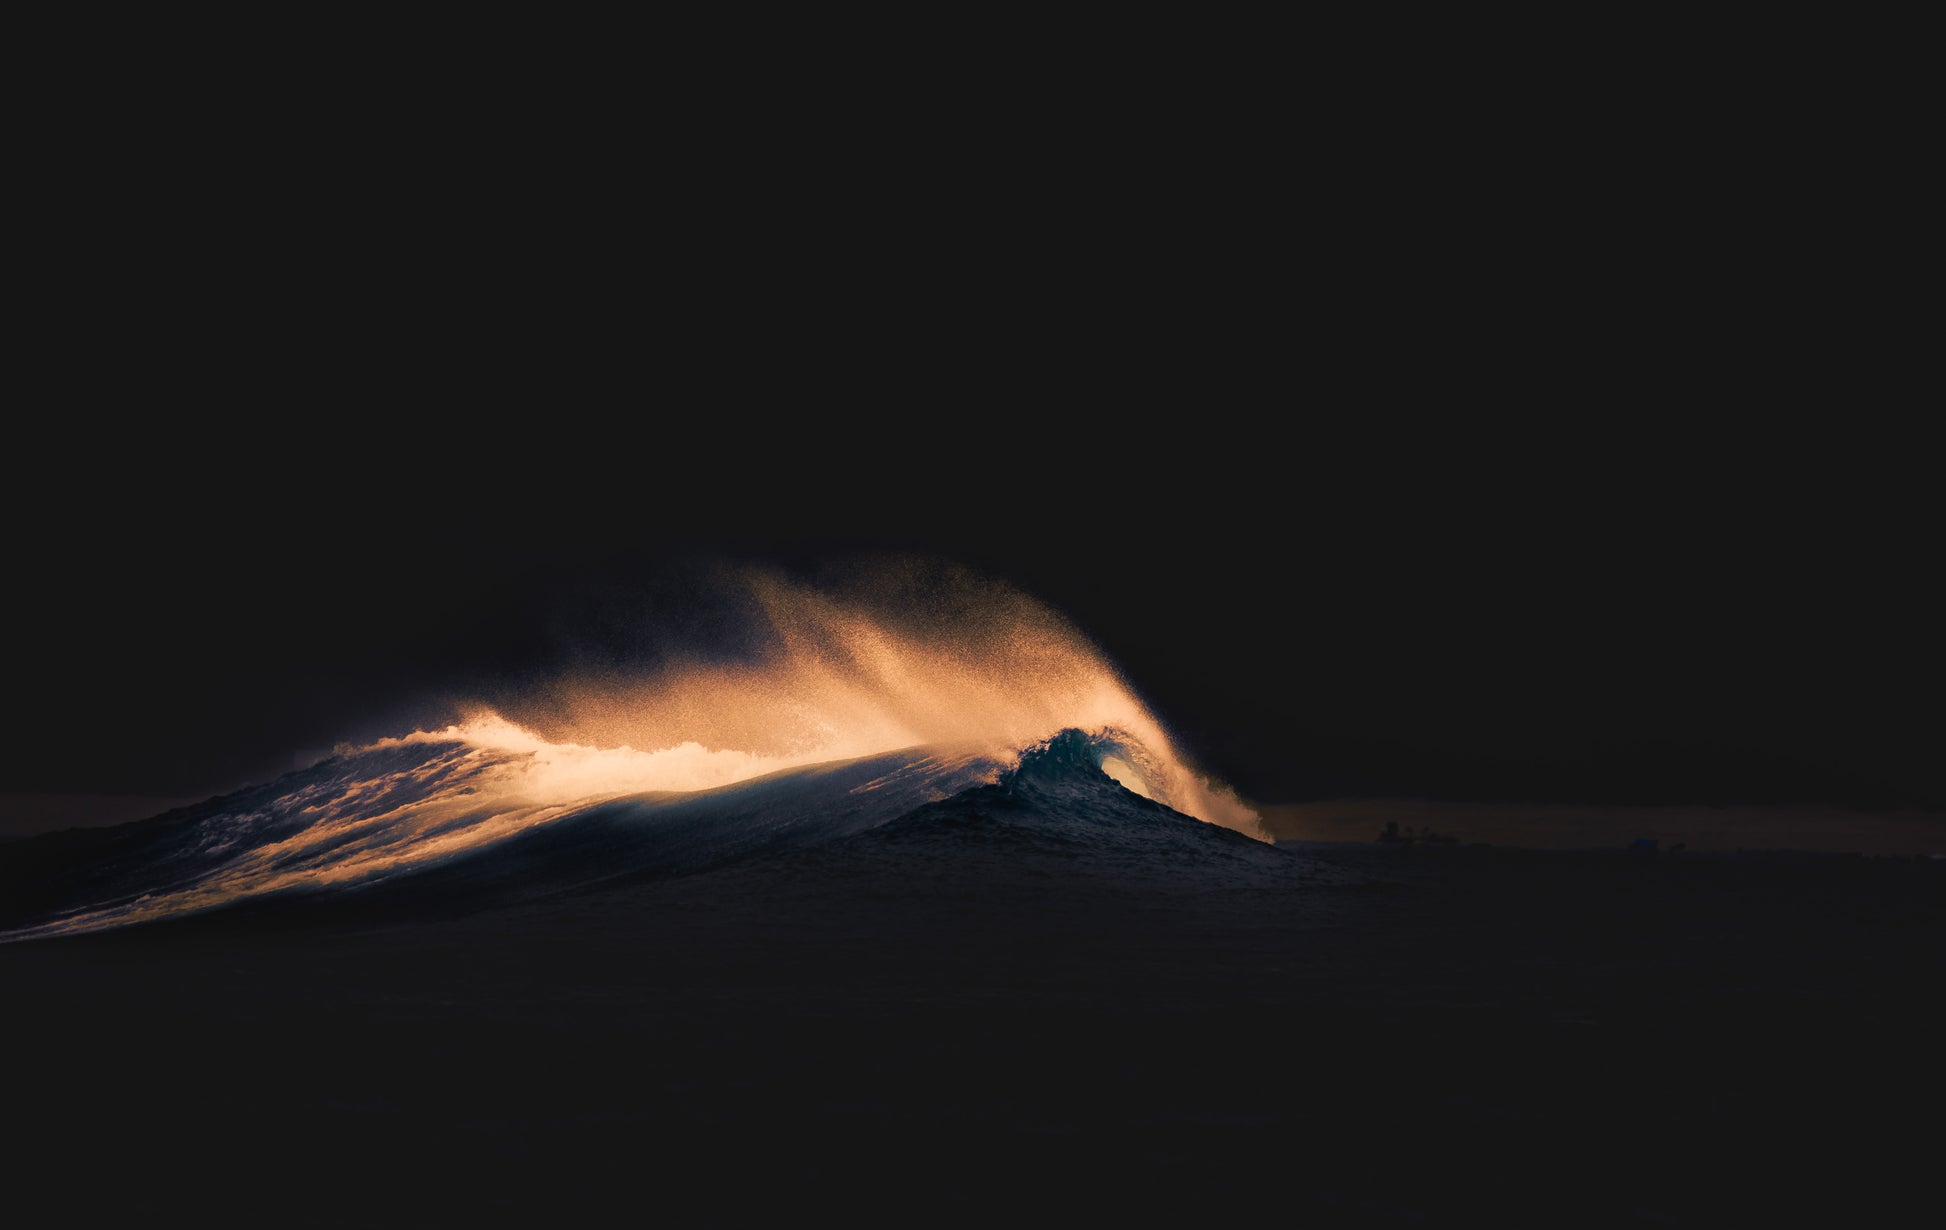 Dark wave was captured at sunrise on Lombok, Indonesia. The peak of the wave is just lit by that first light whilst everything else remains in darkness.   This beautiful image is a limited edition and can be ordered as two separate prints to frame two and hang them together. 